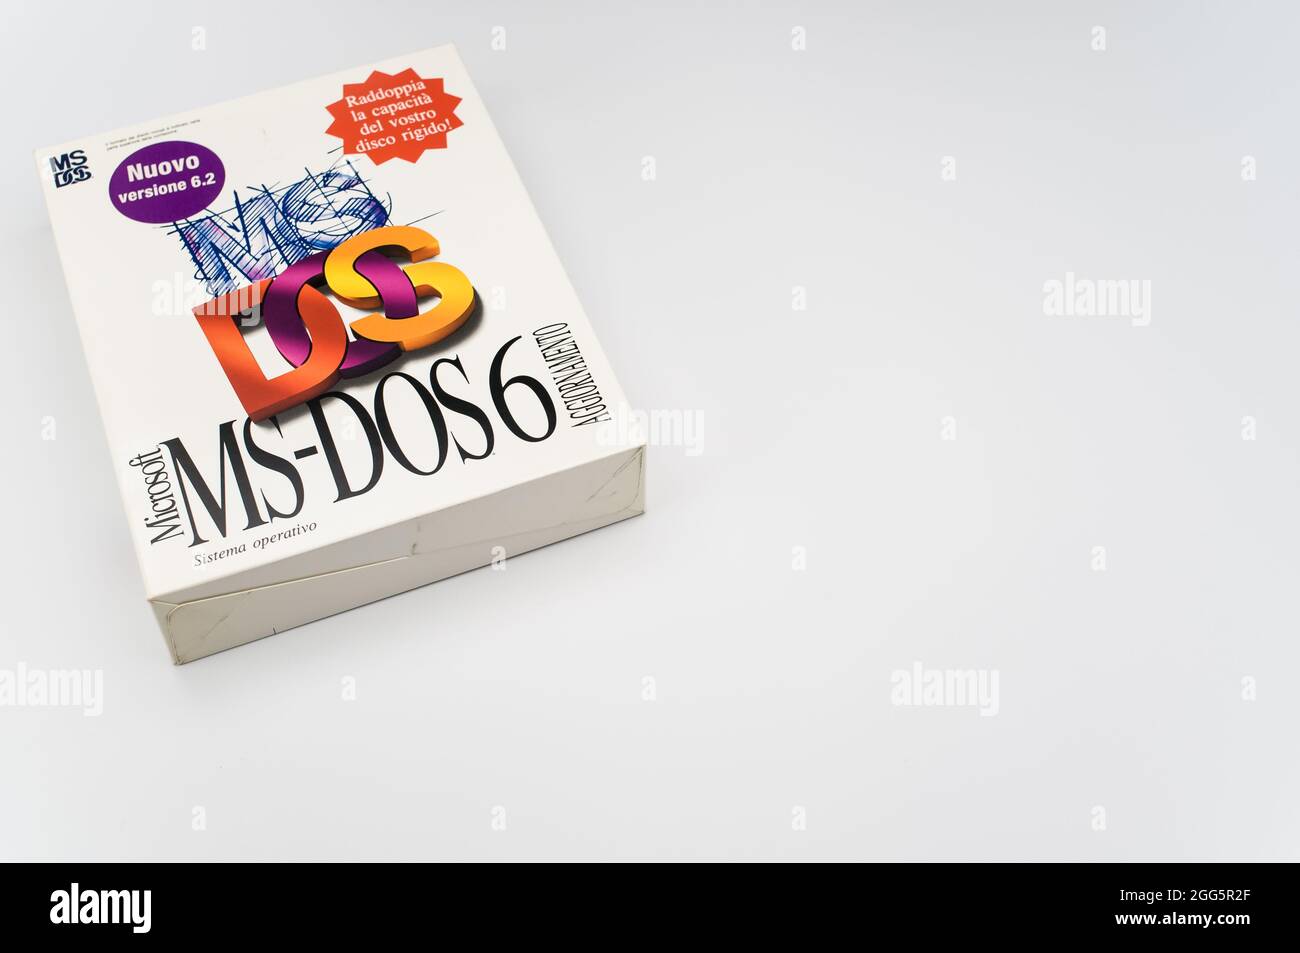 MS DOS personal computer operating system box by Microsoft on a white background with text space Stock Photo